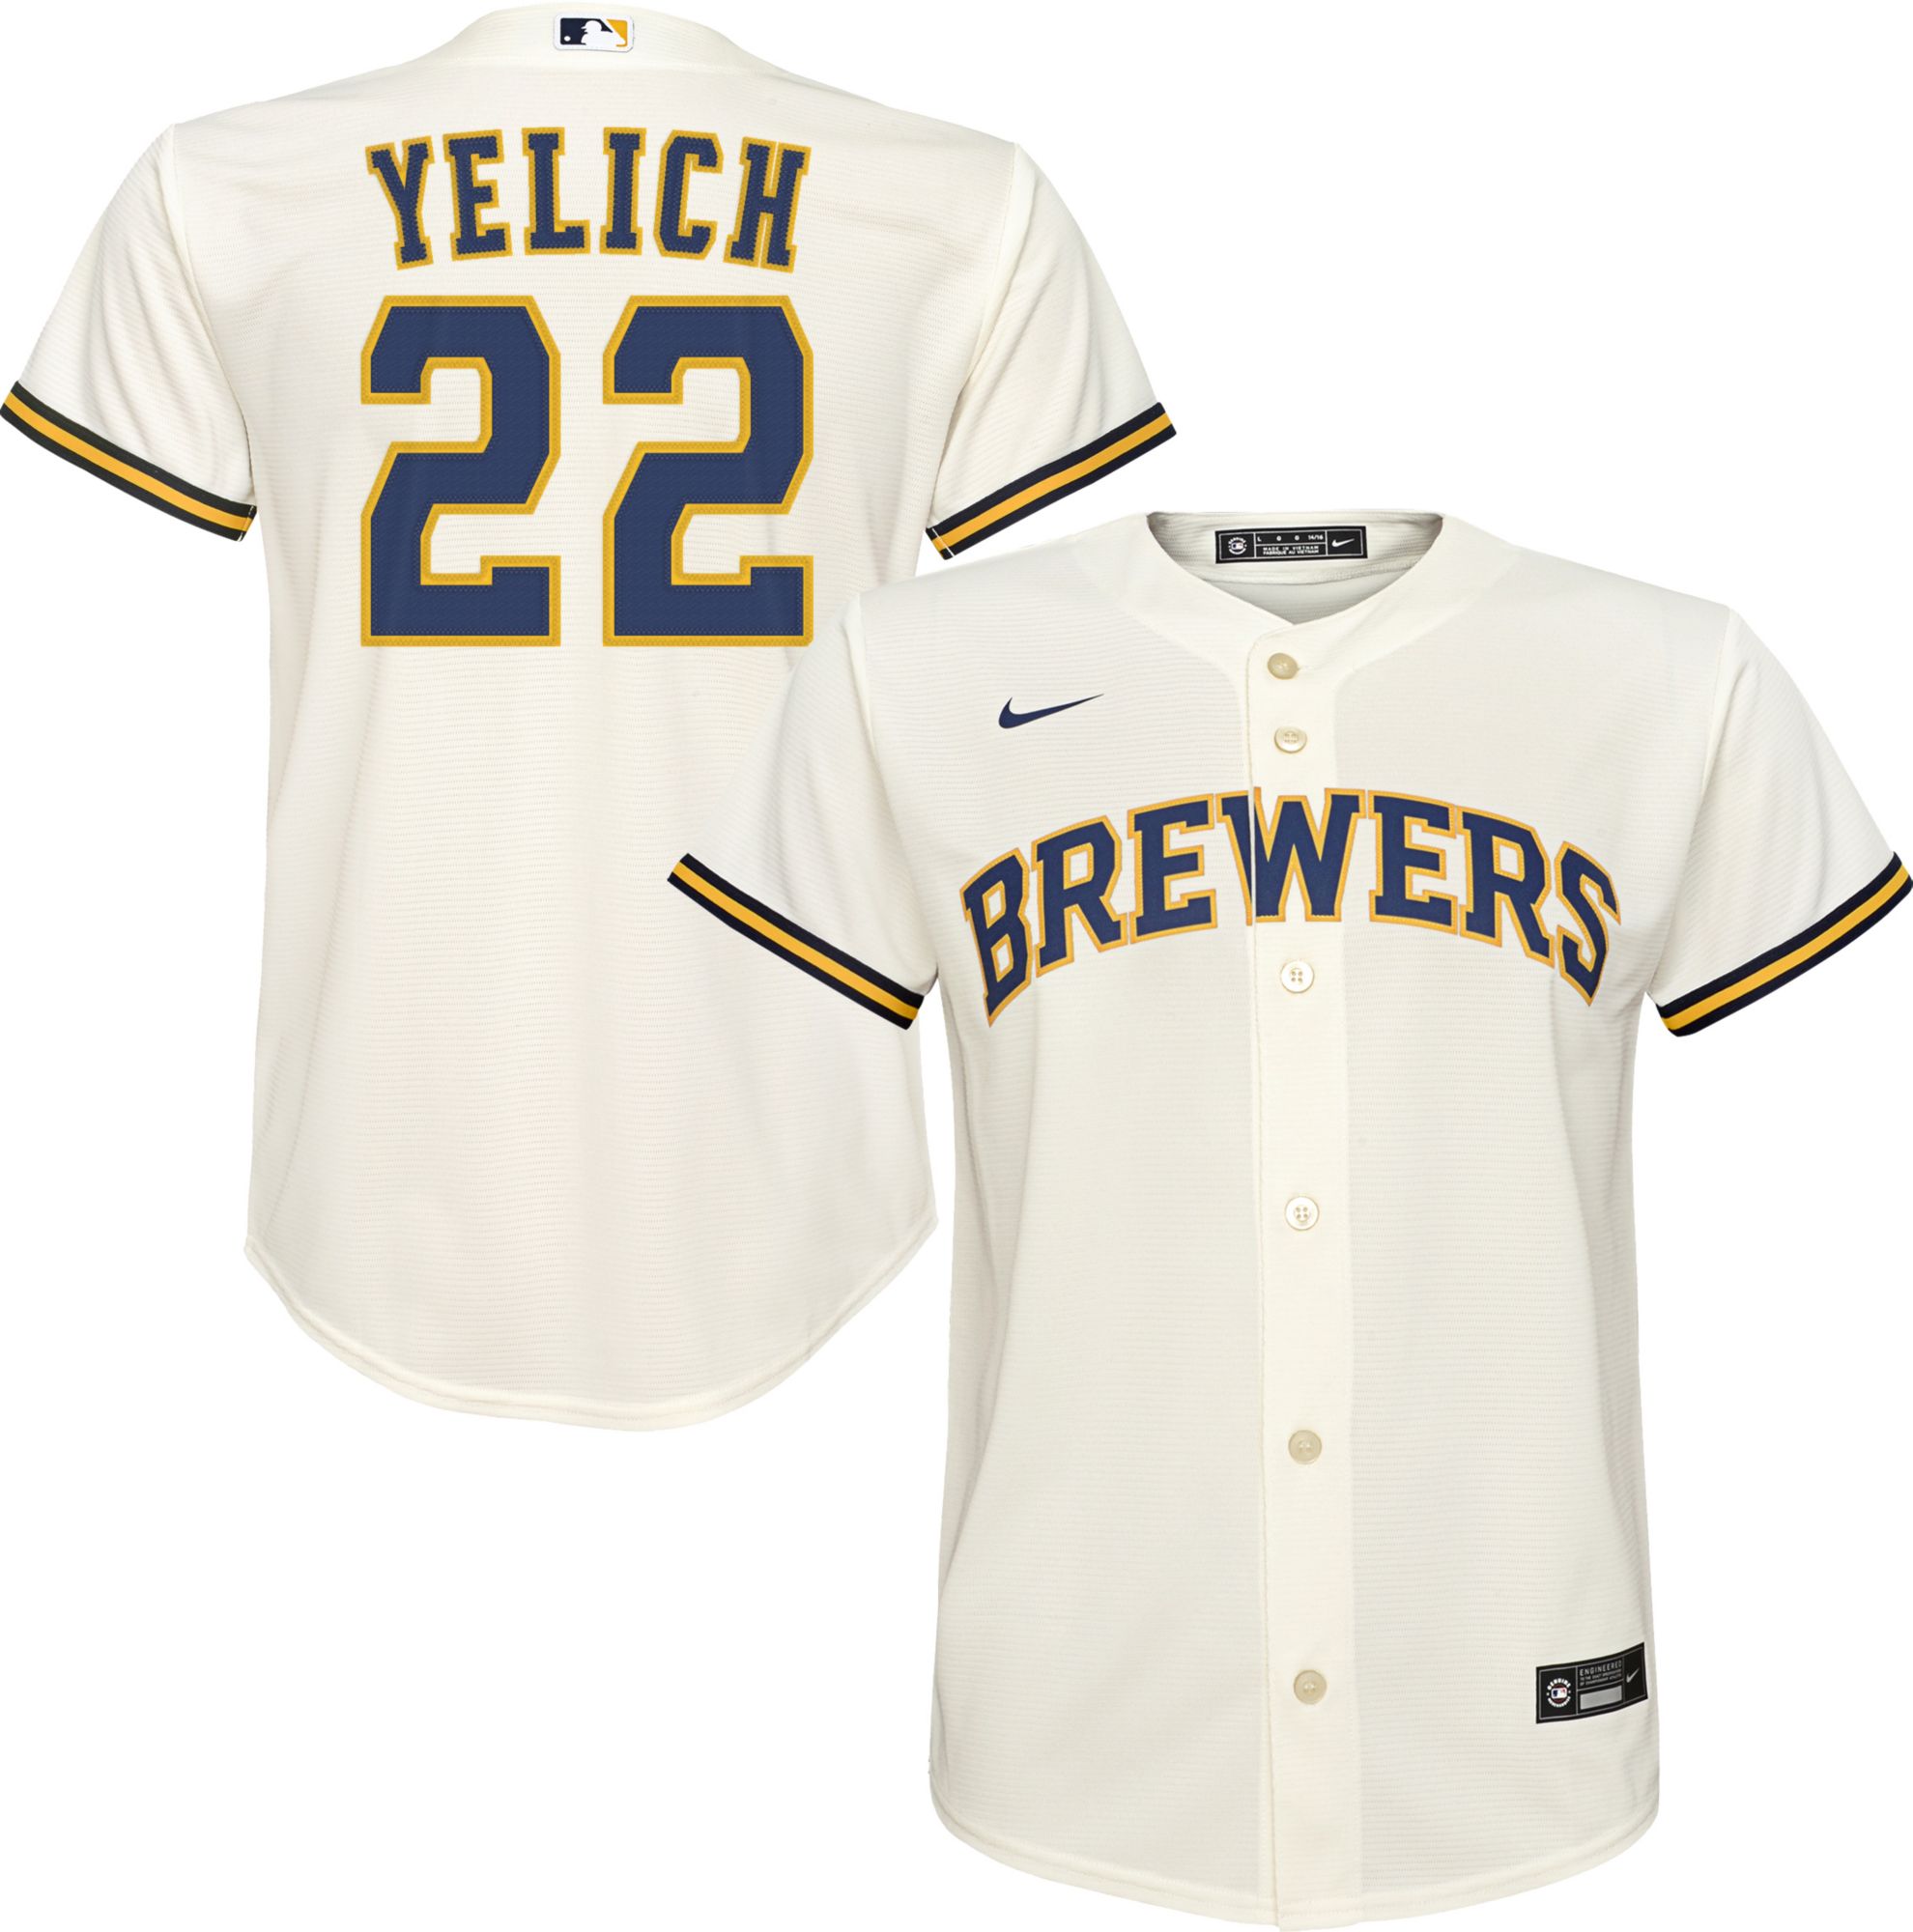 youth yelich jersey